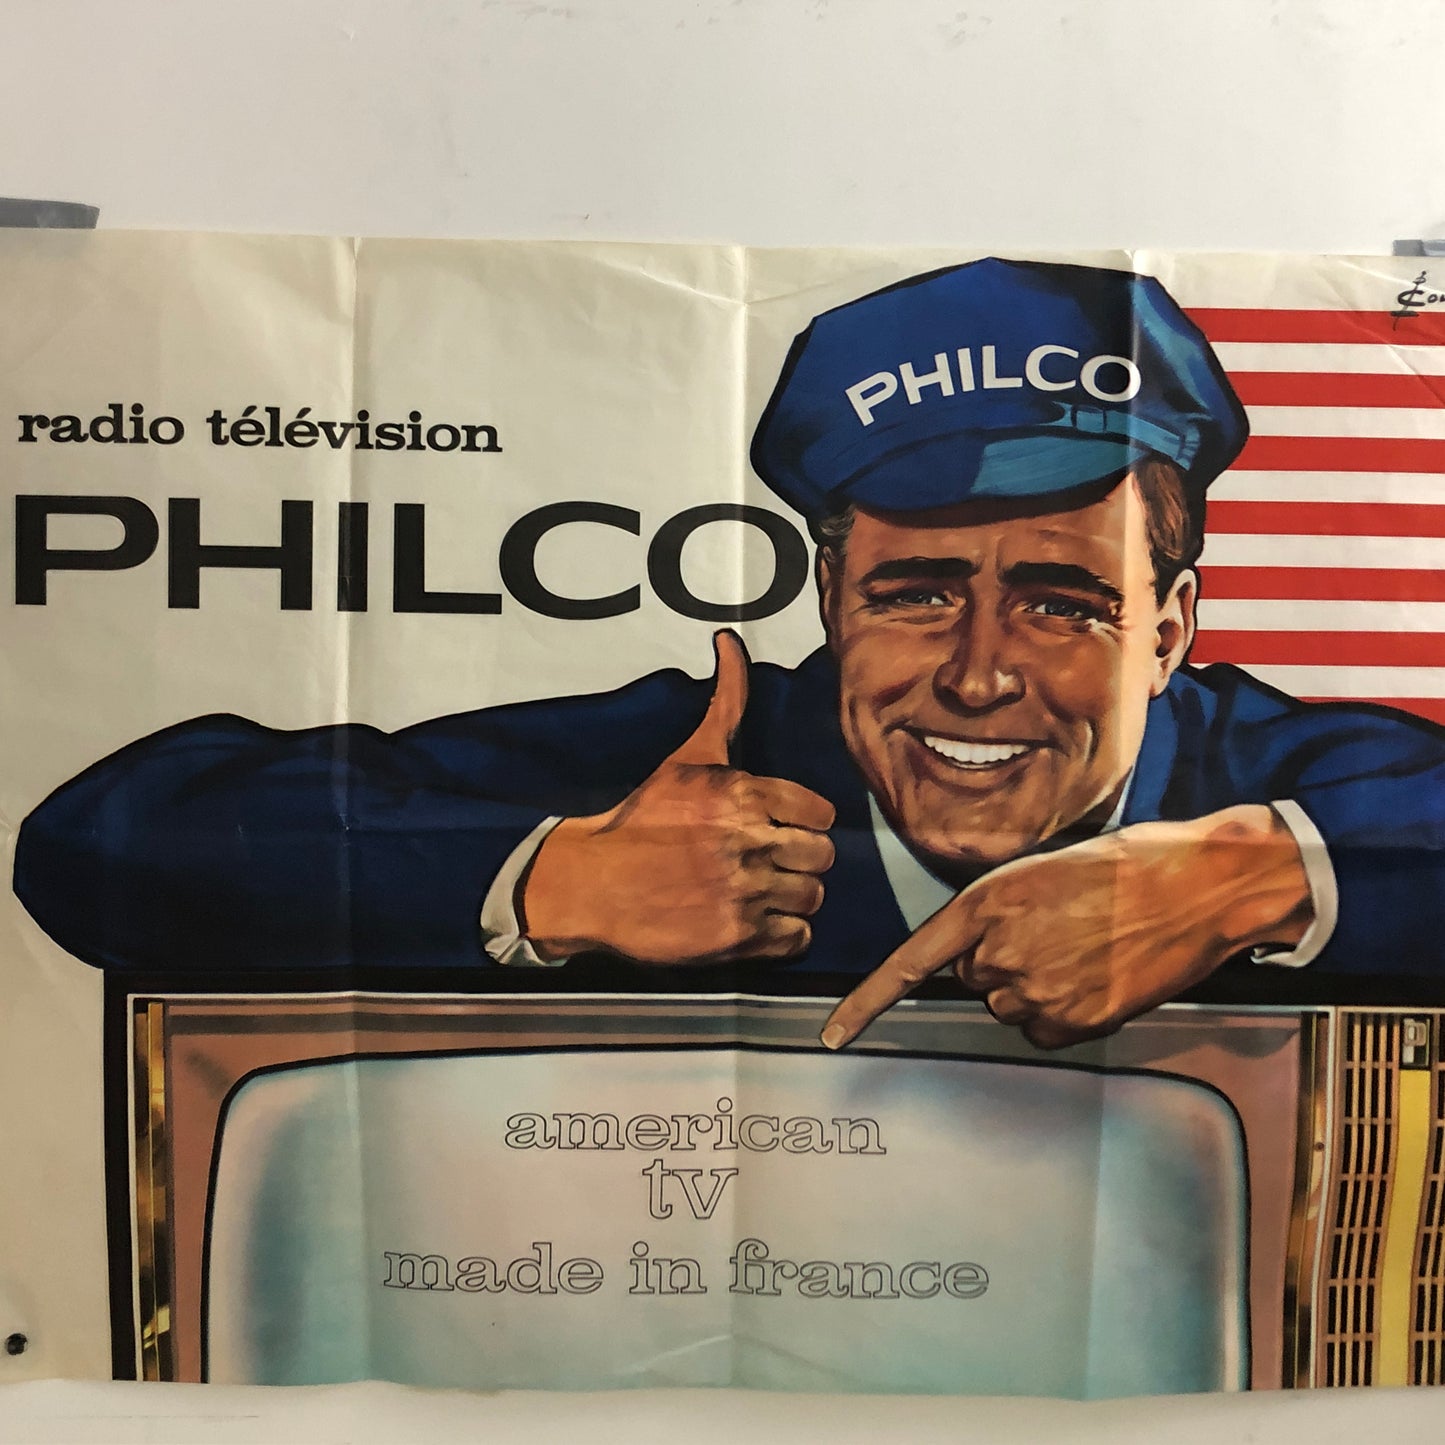 Philco, Advertising American TV Made in France Designed by Pierre Couronne and Printed by R.L. Dupuy. 50s 60s